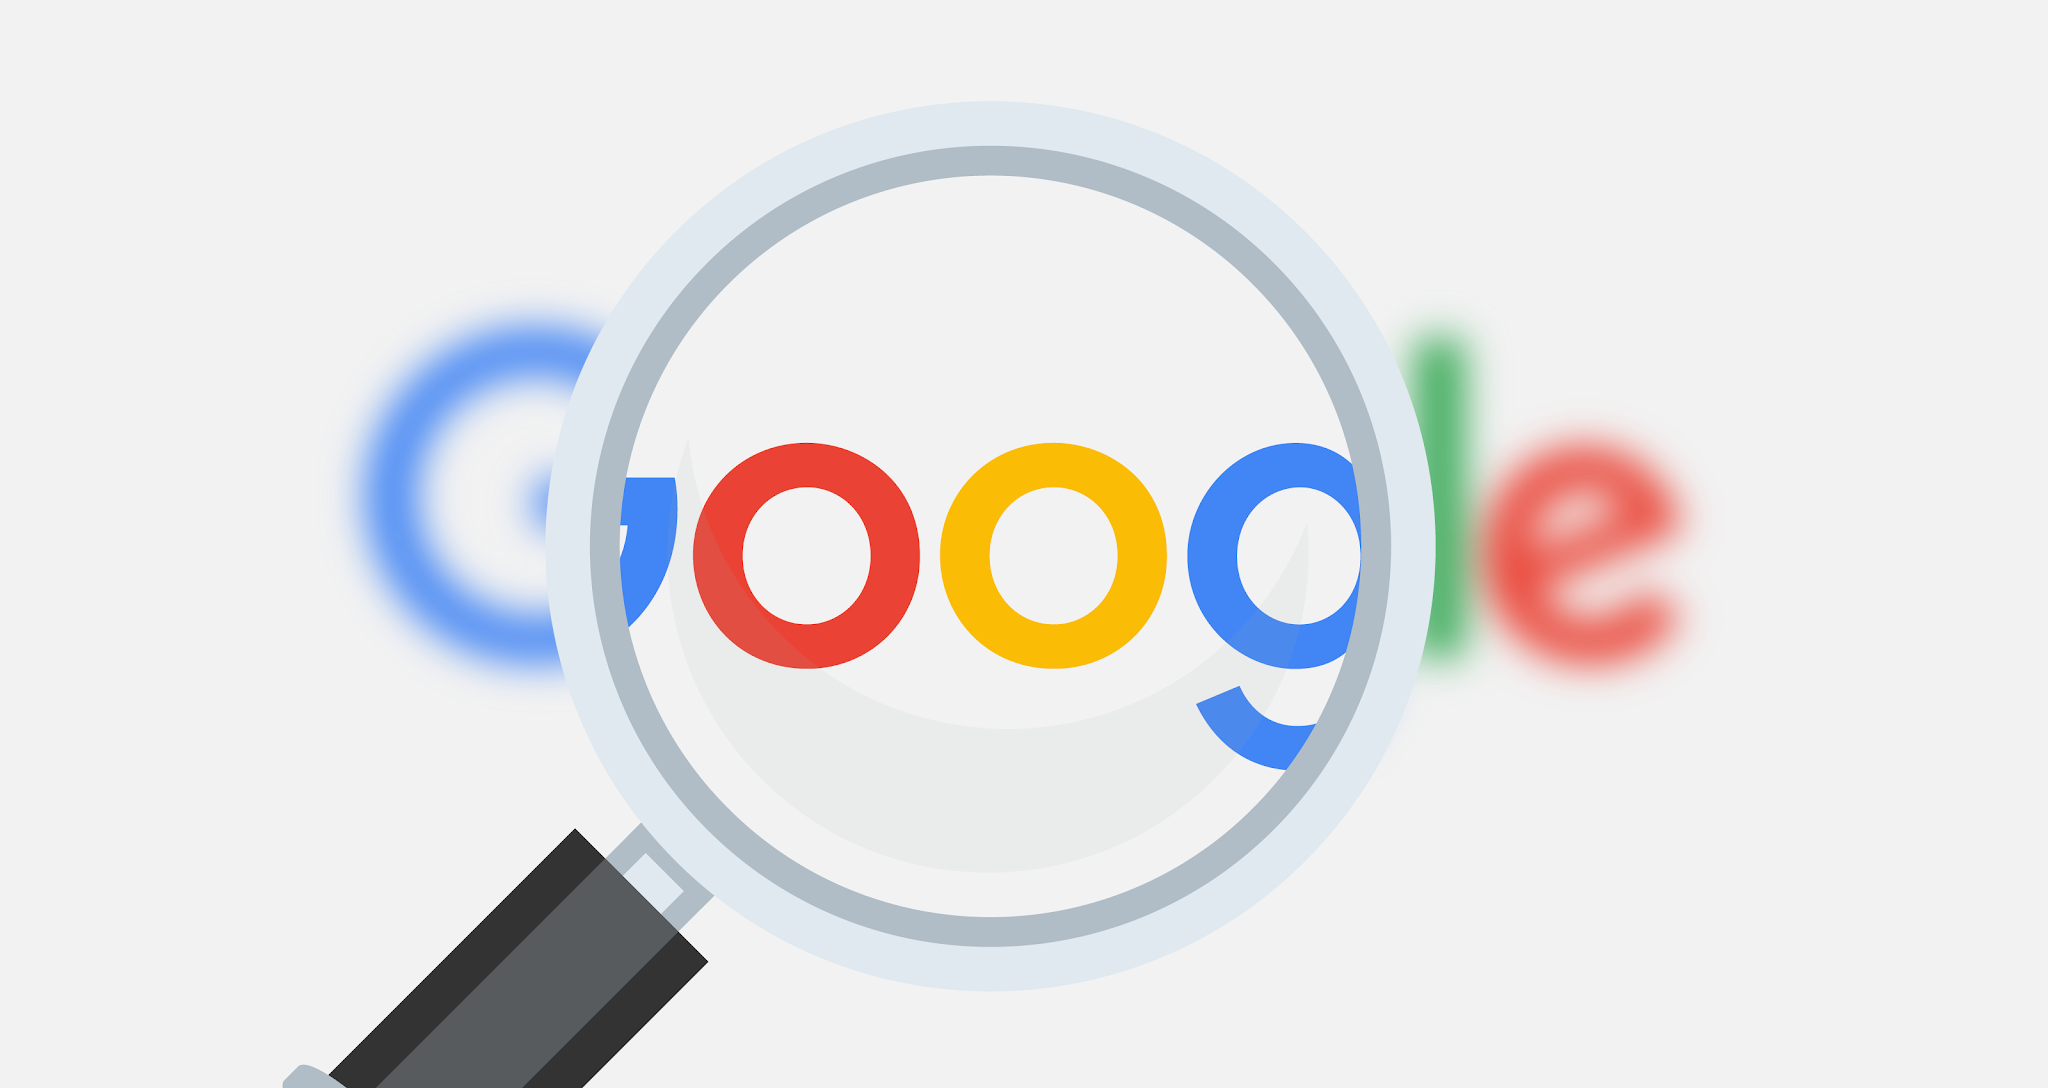 Google search engine missed the first line in the traffic ranking